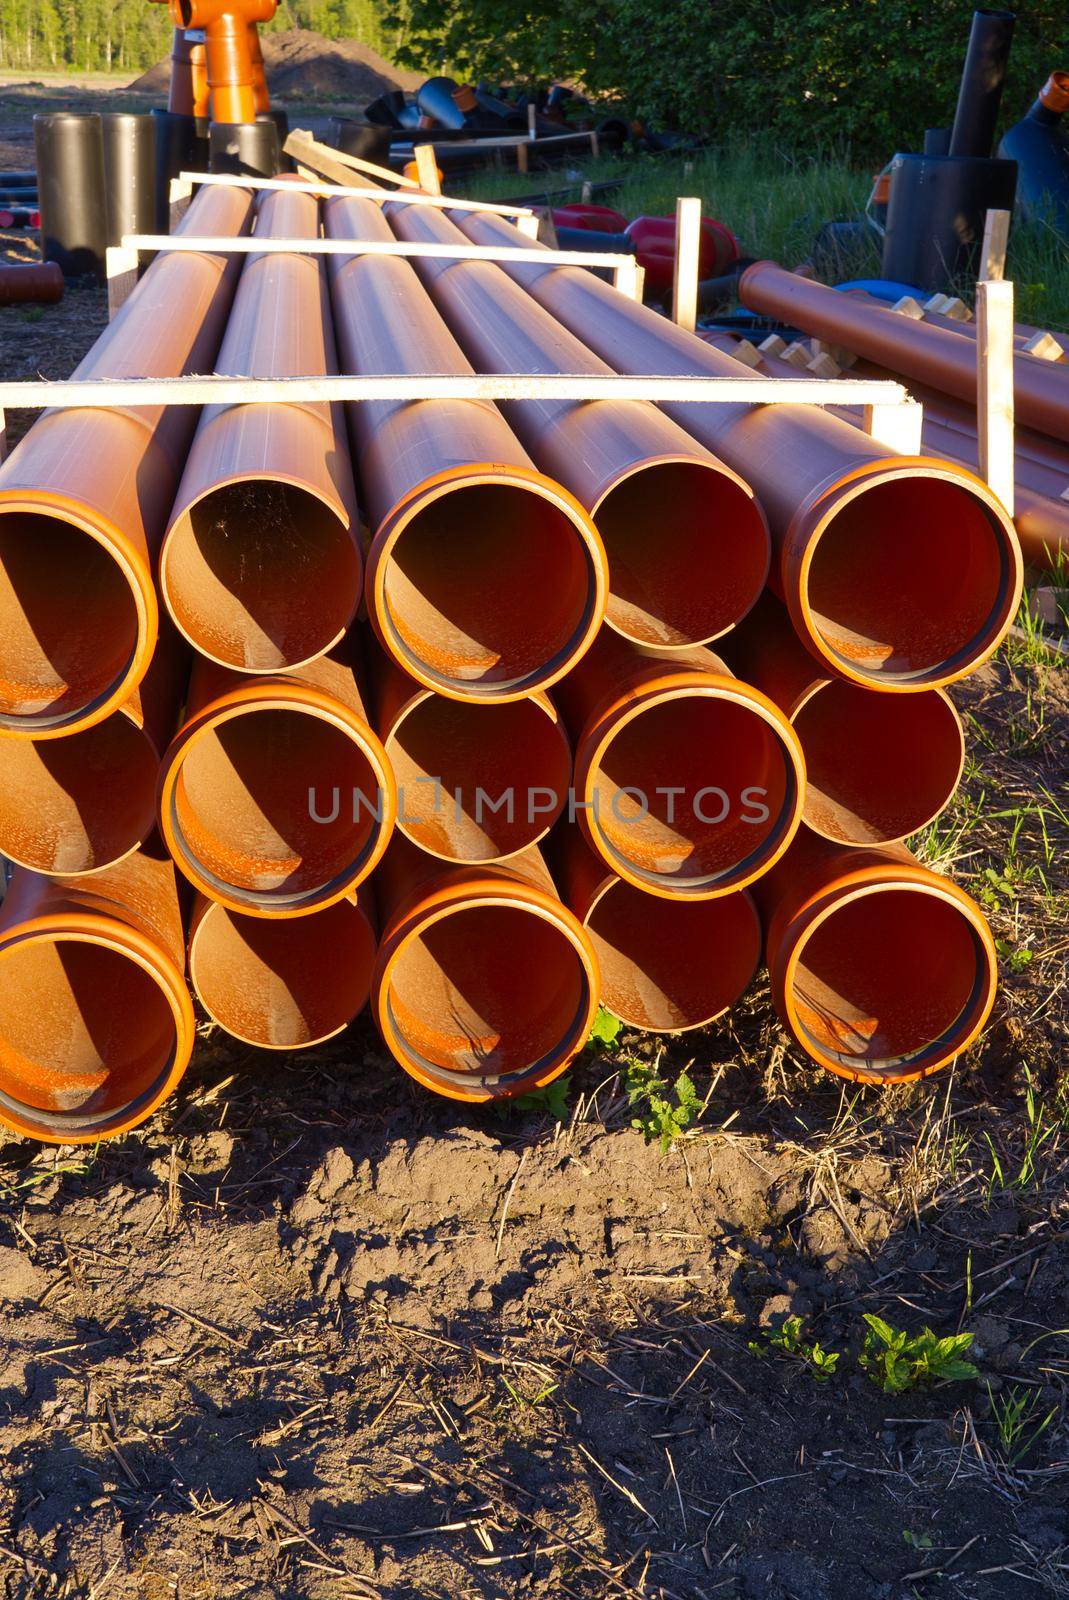 sewer orange pvc pipes stacked on construction site. by PhotoTime